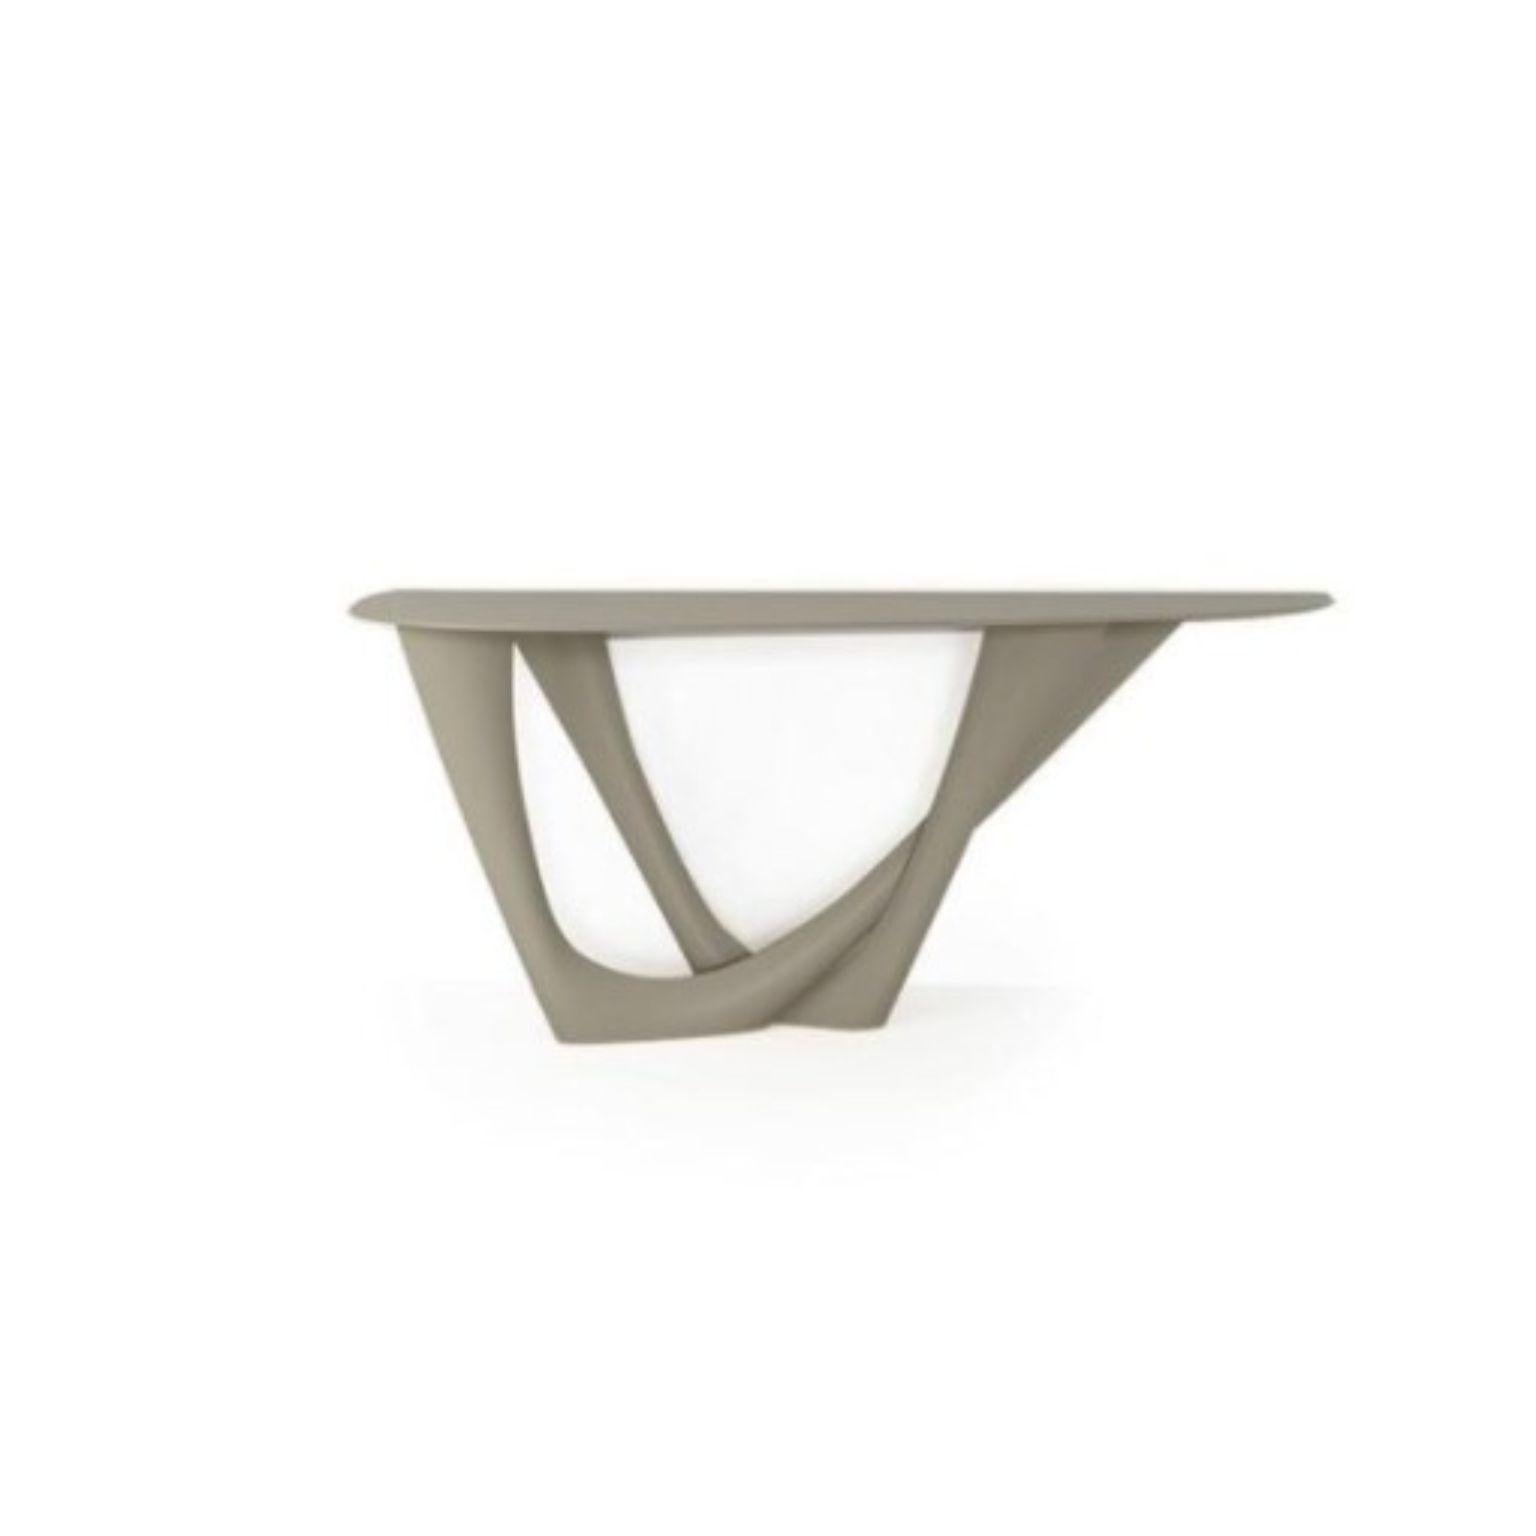 Stone Grey G-Console Duo Steel Base and Top by Zieta
Dimensions: D 56 x W 168 x H 75 cm 
Material: Steel.
Also available in different colors and dimensions.

G-Console is another bionic object in our collection. Created for smaller spaces, it gives